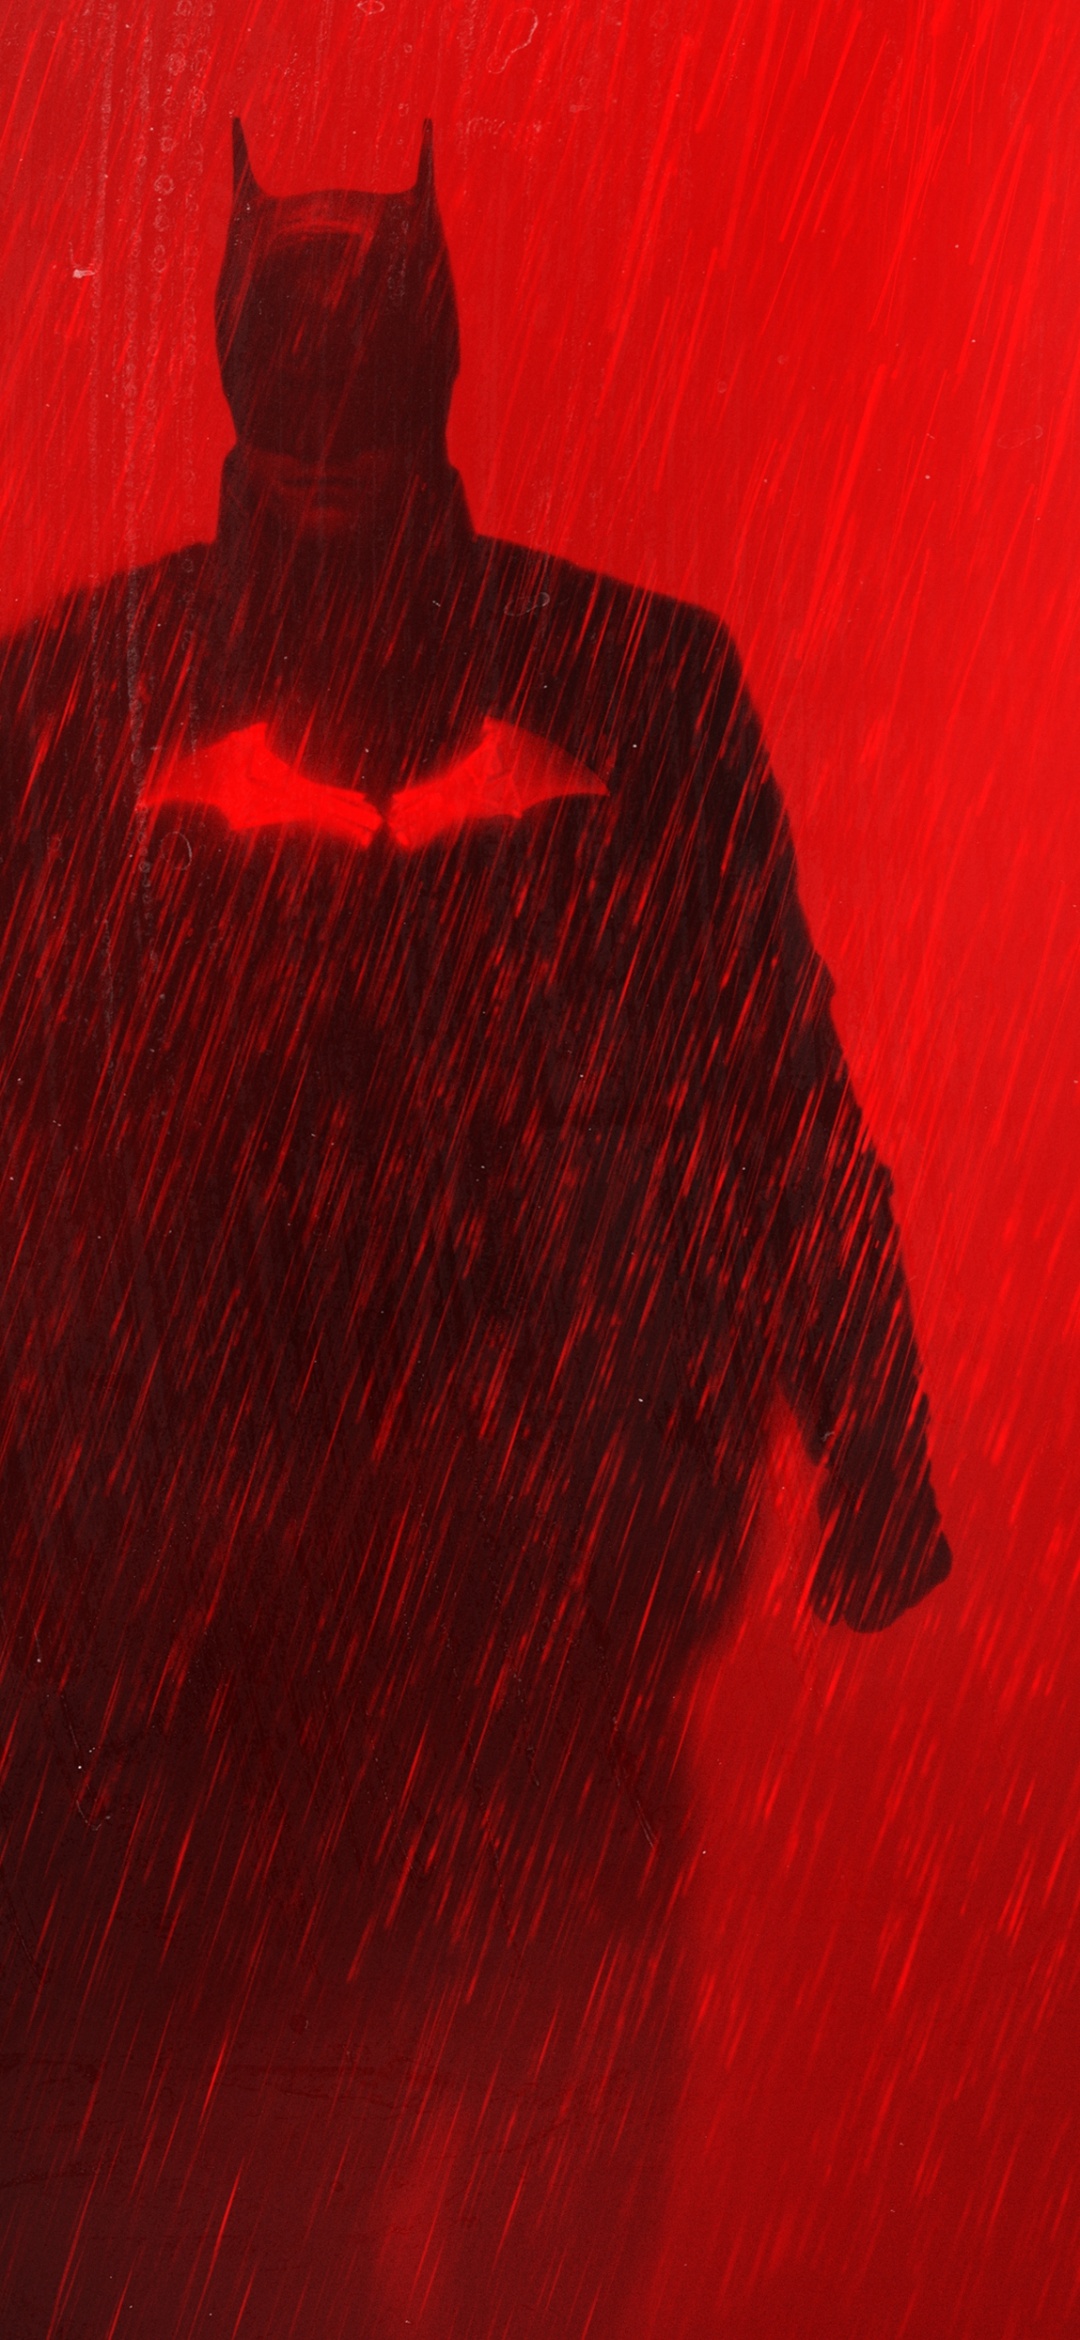 The Batman Minimal 8k Wallpaper,HD Movies Wallpapers,4k Wallpapers,Images, Backgrounds,Photos and Pictures